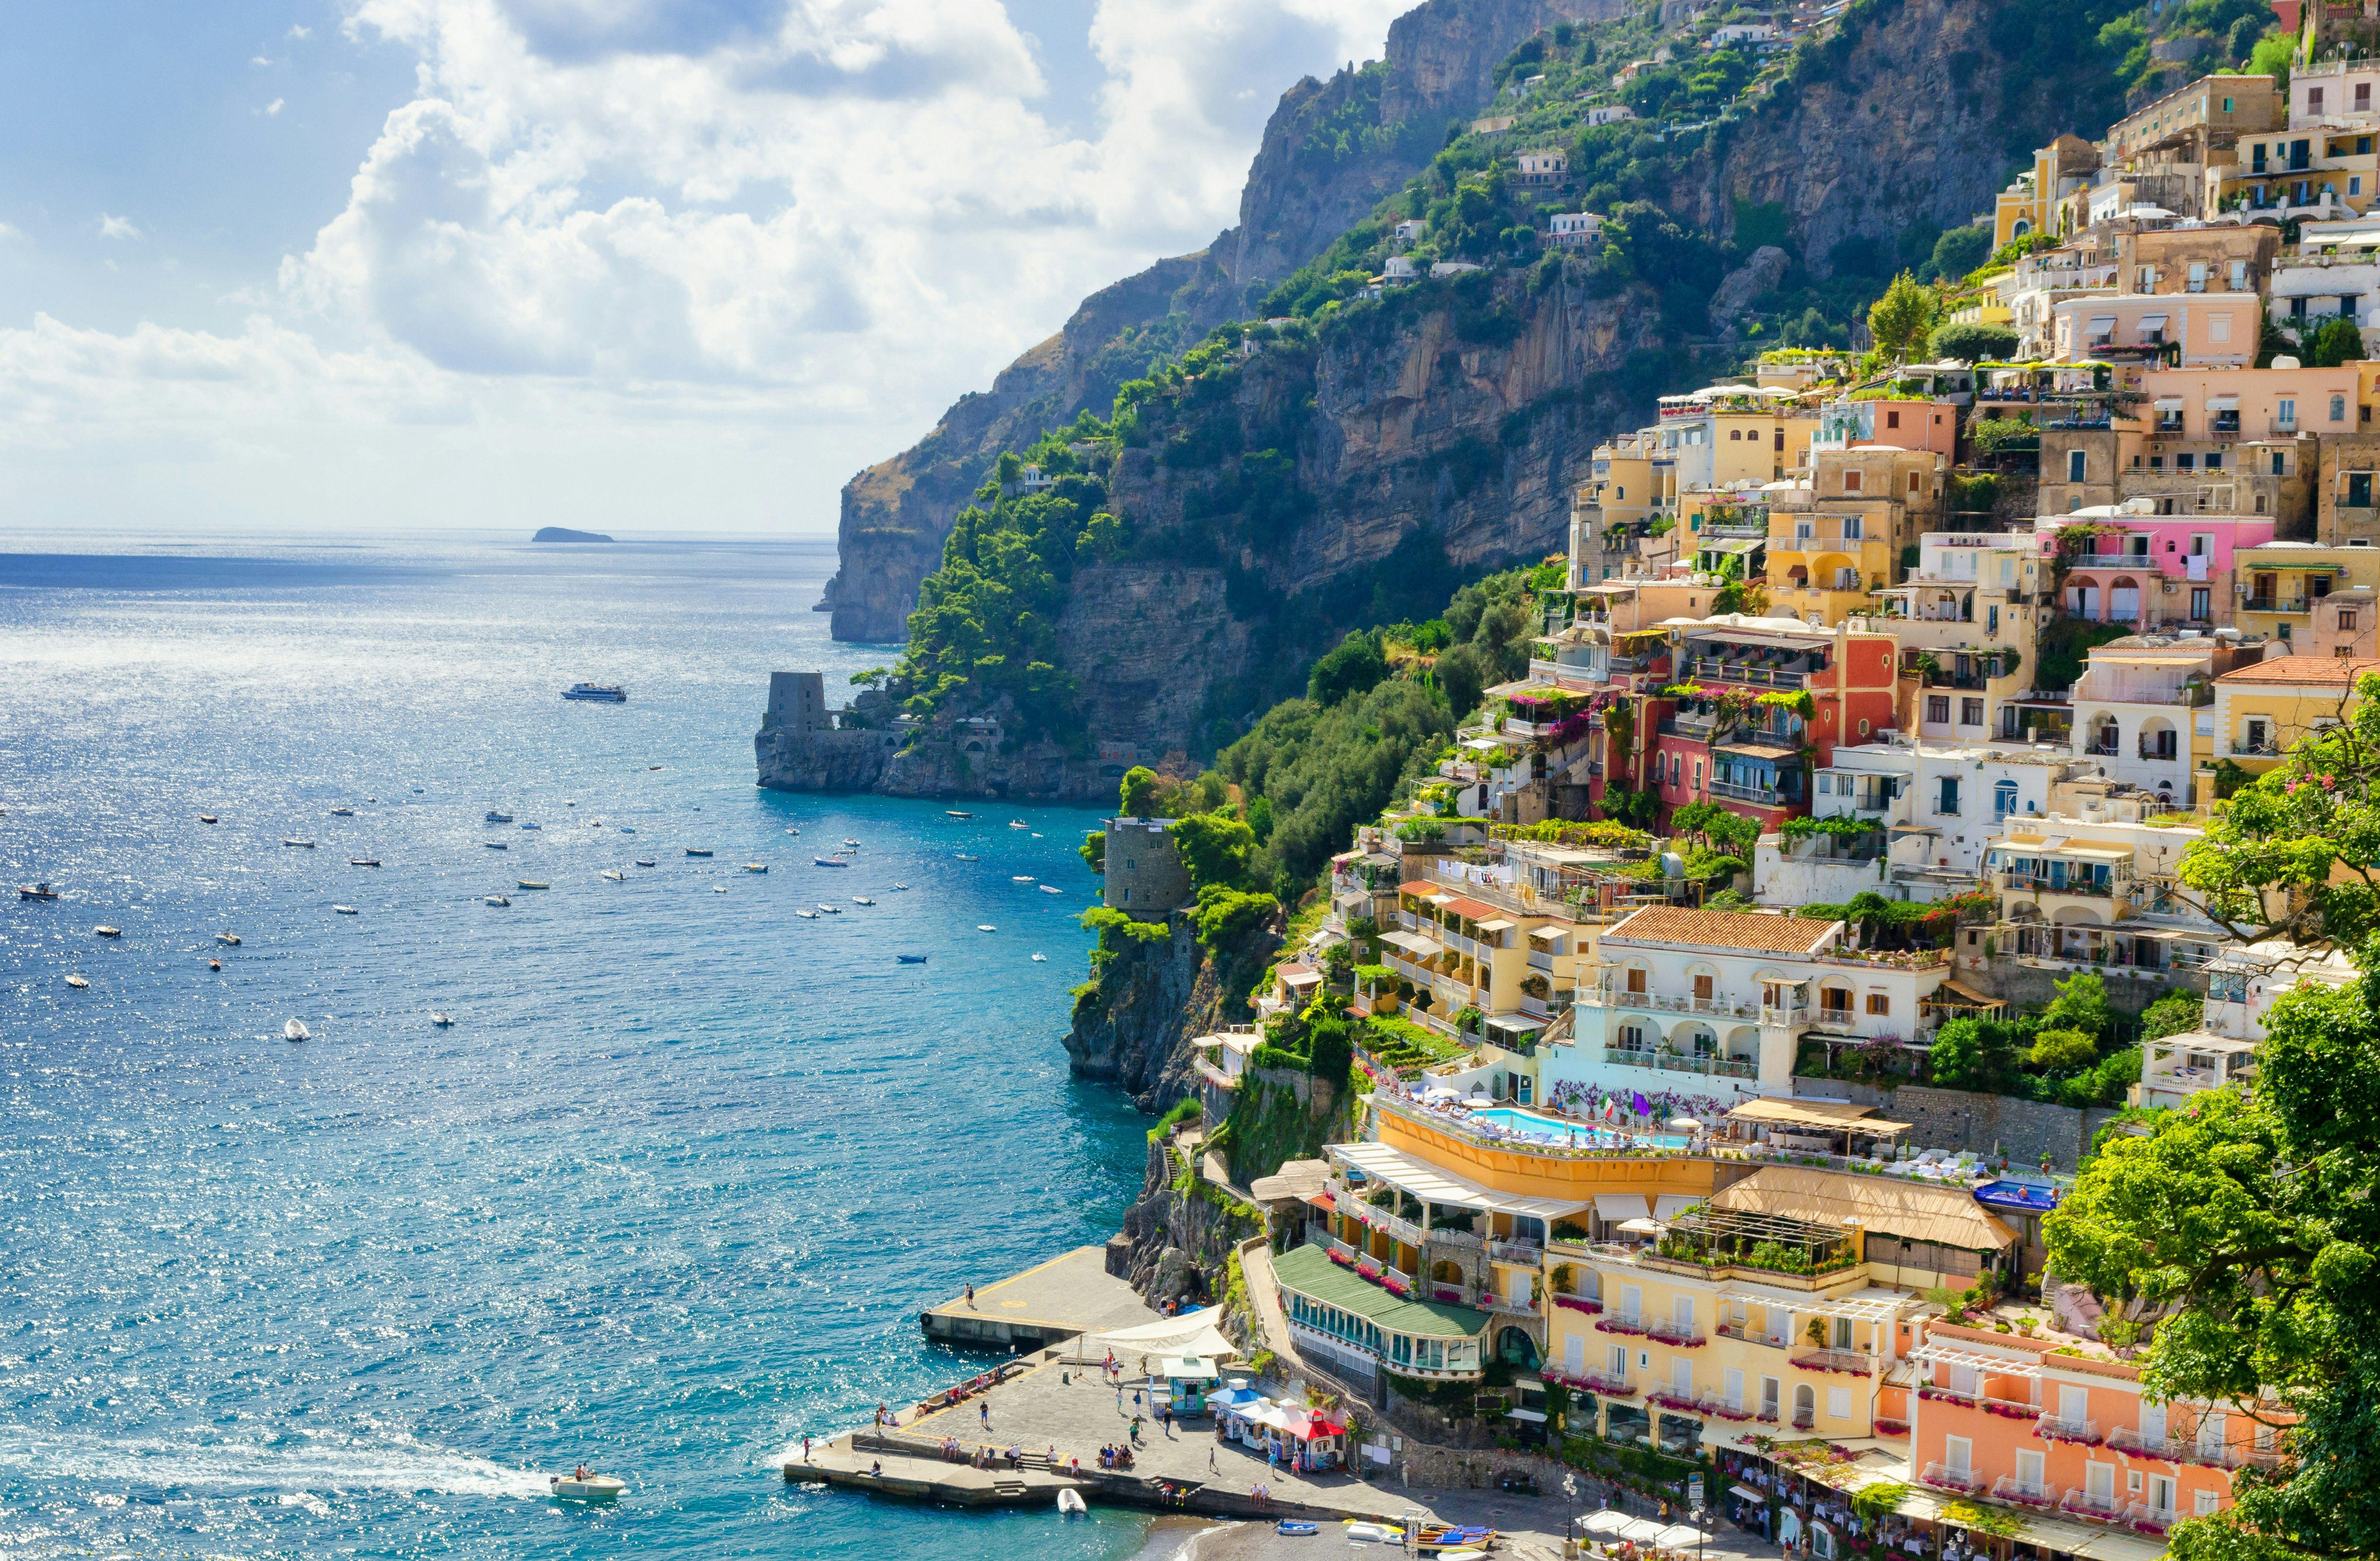 An aerial view of Positano in Italy, with colourful villas built on a sloping hillside that goes right down to the blue waters of the Tyrrhenian Sea.